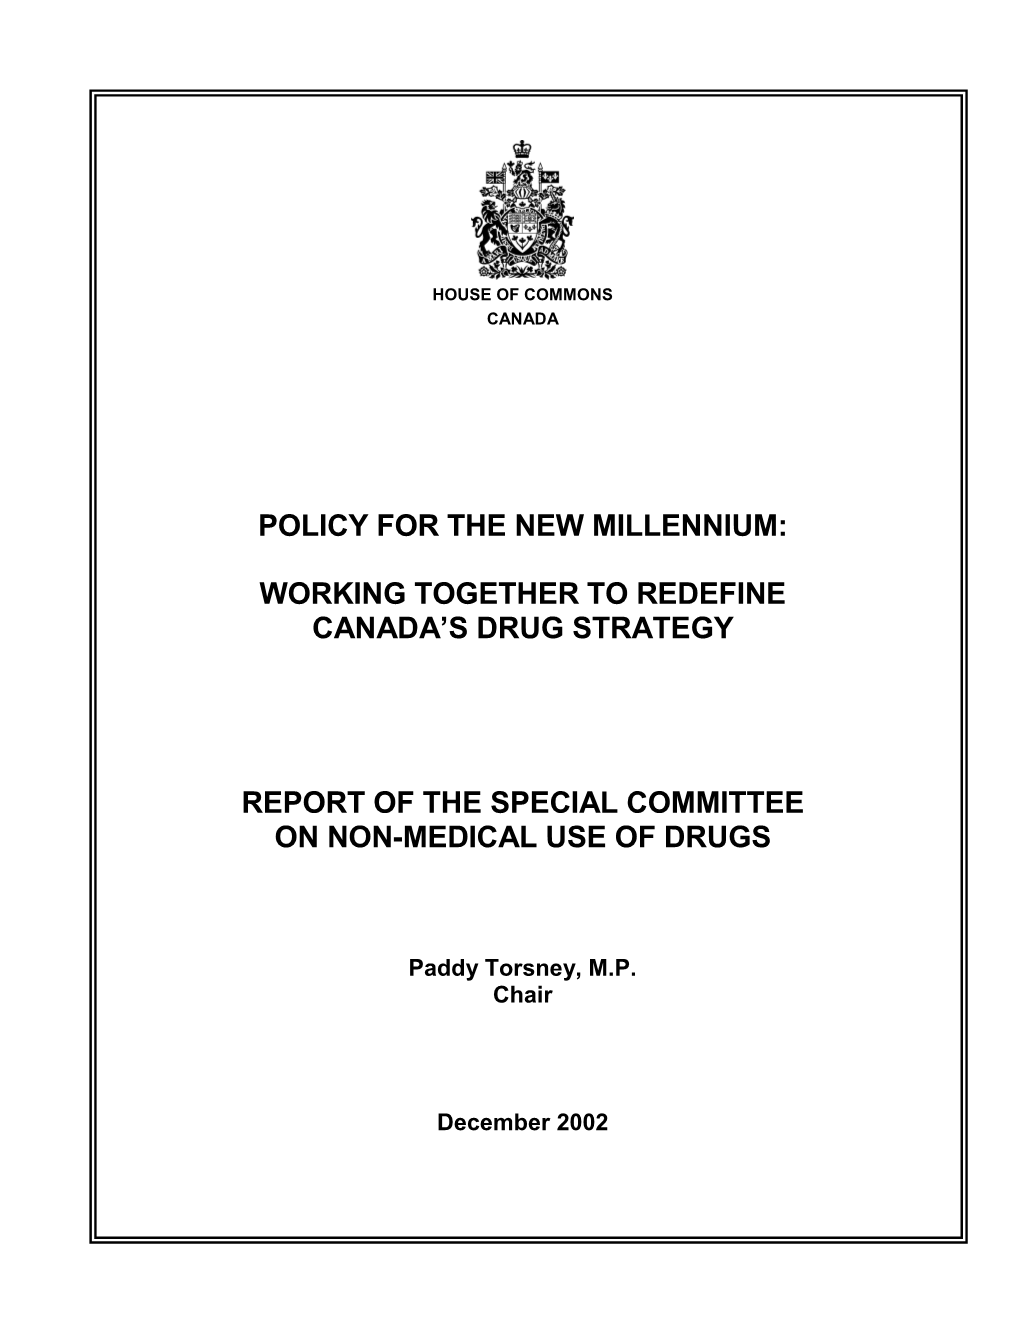 Policy for the New Millennium: Working Together to Redefine Canada's Drug Strategy Report of the Special Committee on Non-Medi